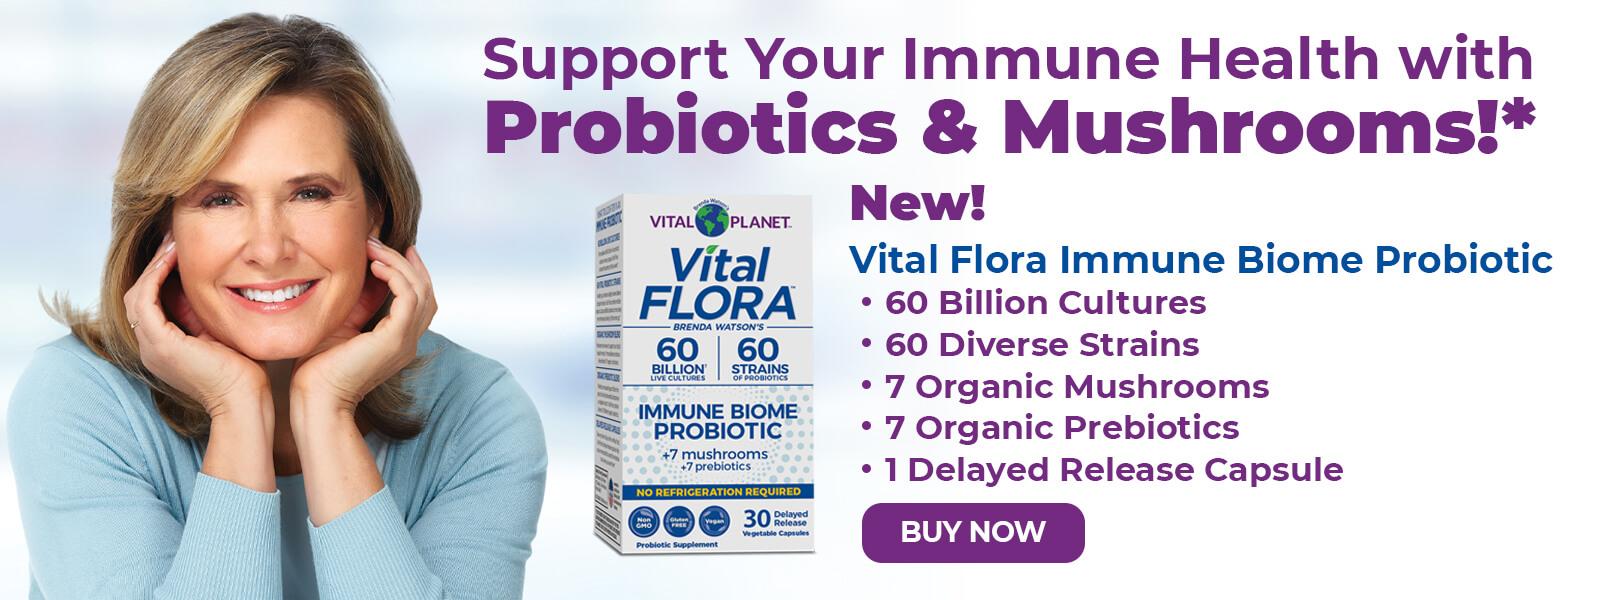 Support your immune health withe prebiotics and mushrooms